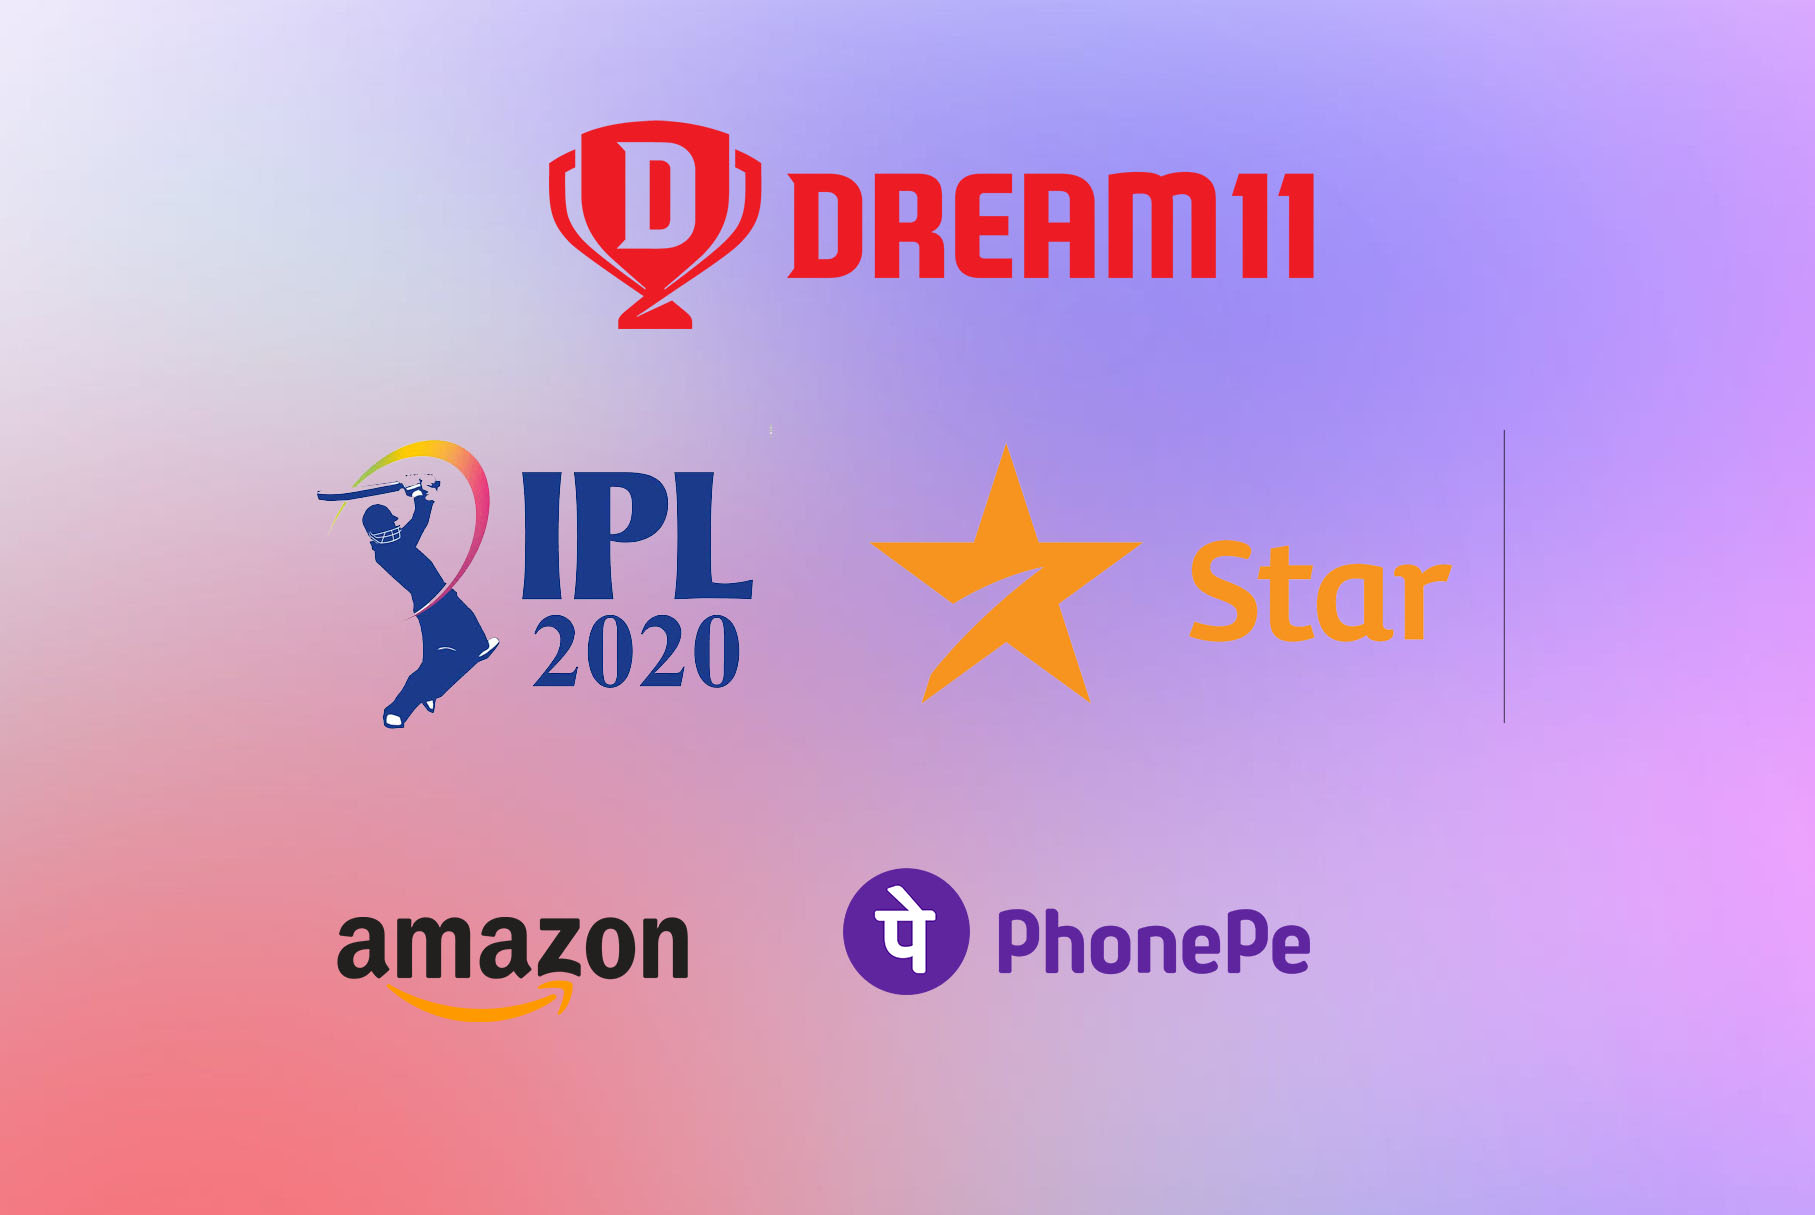 Star India Signs Amazon, PhonePe as Co-presenting Partners Along with the Title Sponsor Dream11